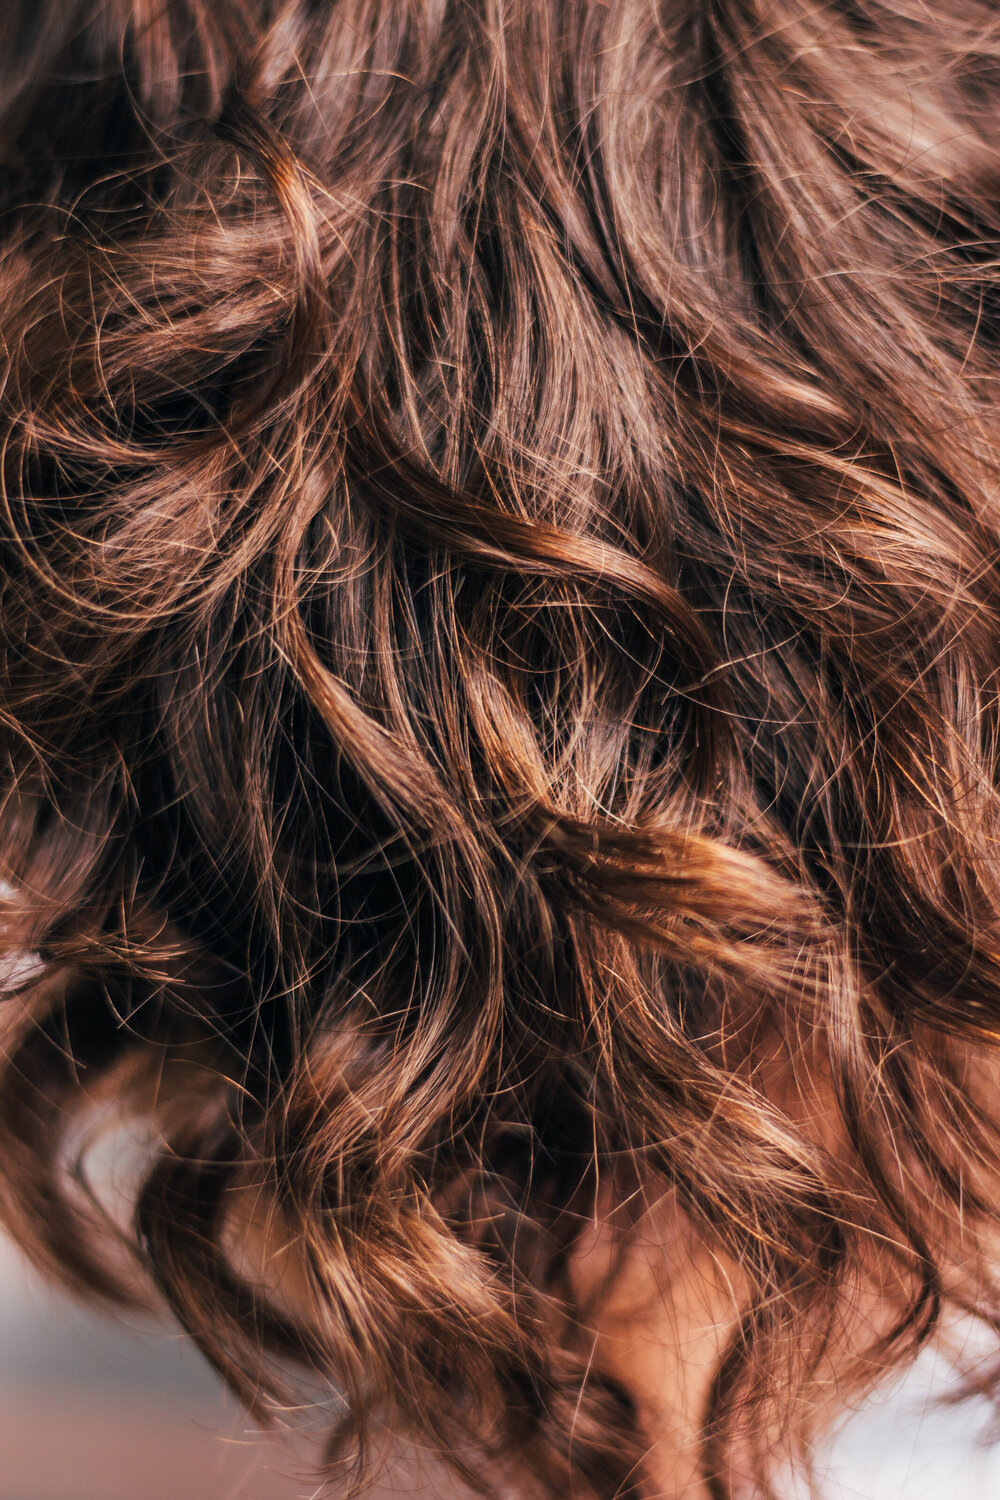 How to get more Volume in your hair